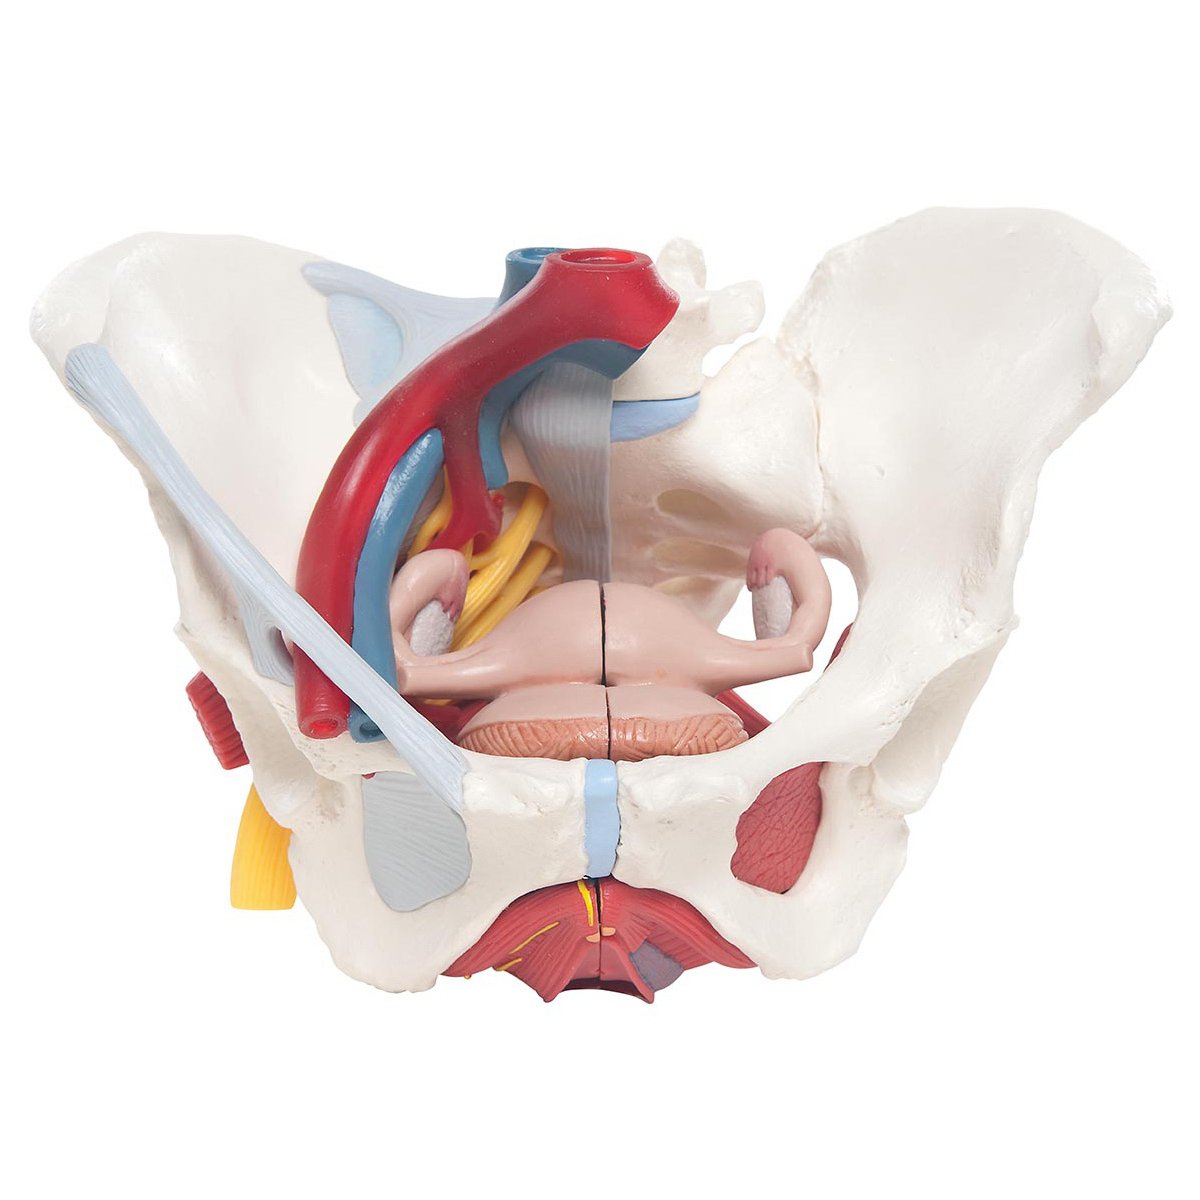 Life Size Female Pelvis Anatomy Model With Ligaments Vessels Nerves And